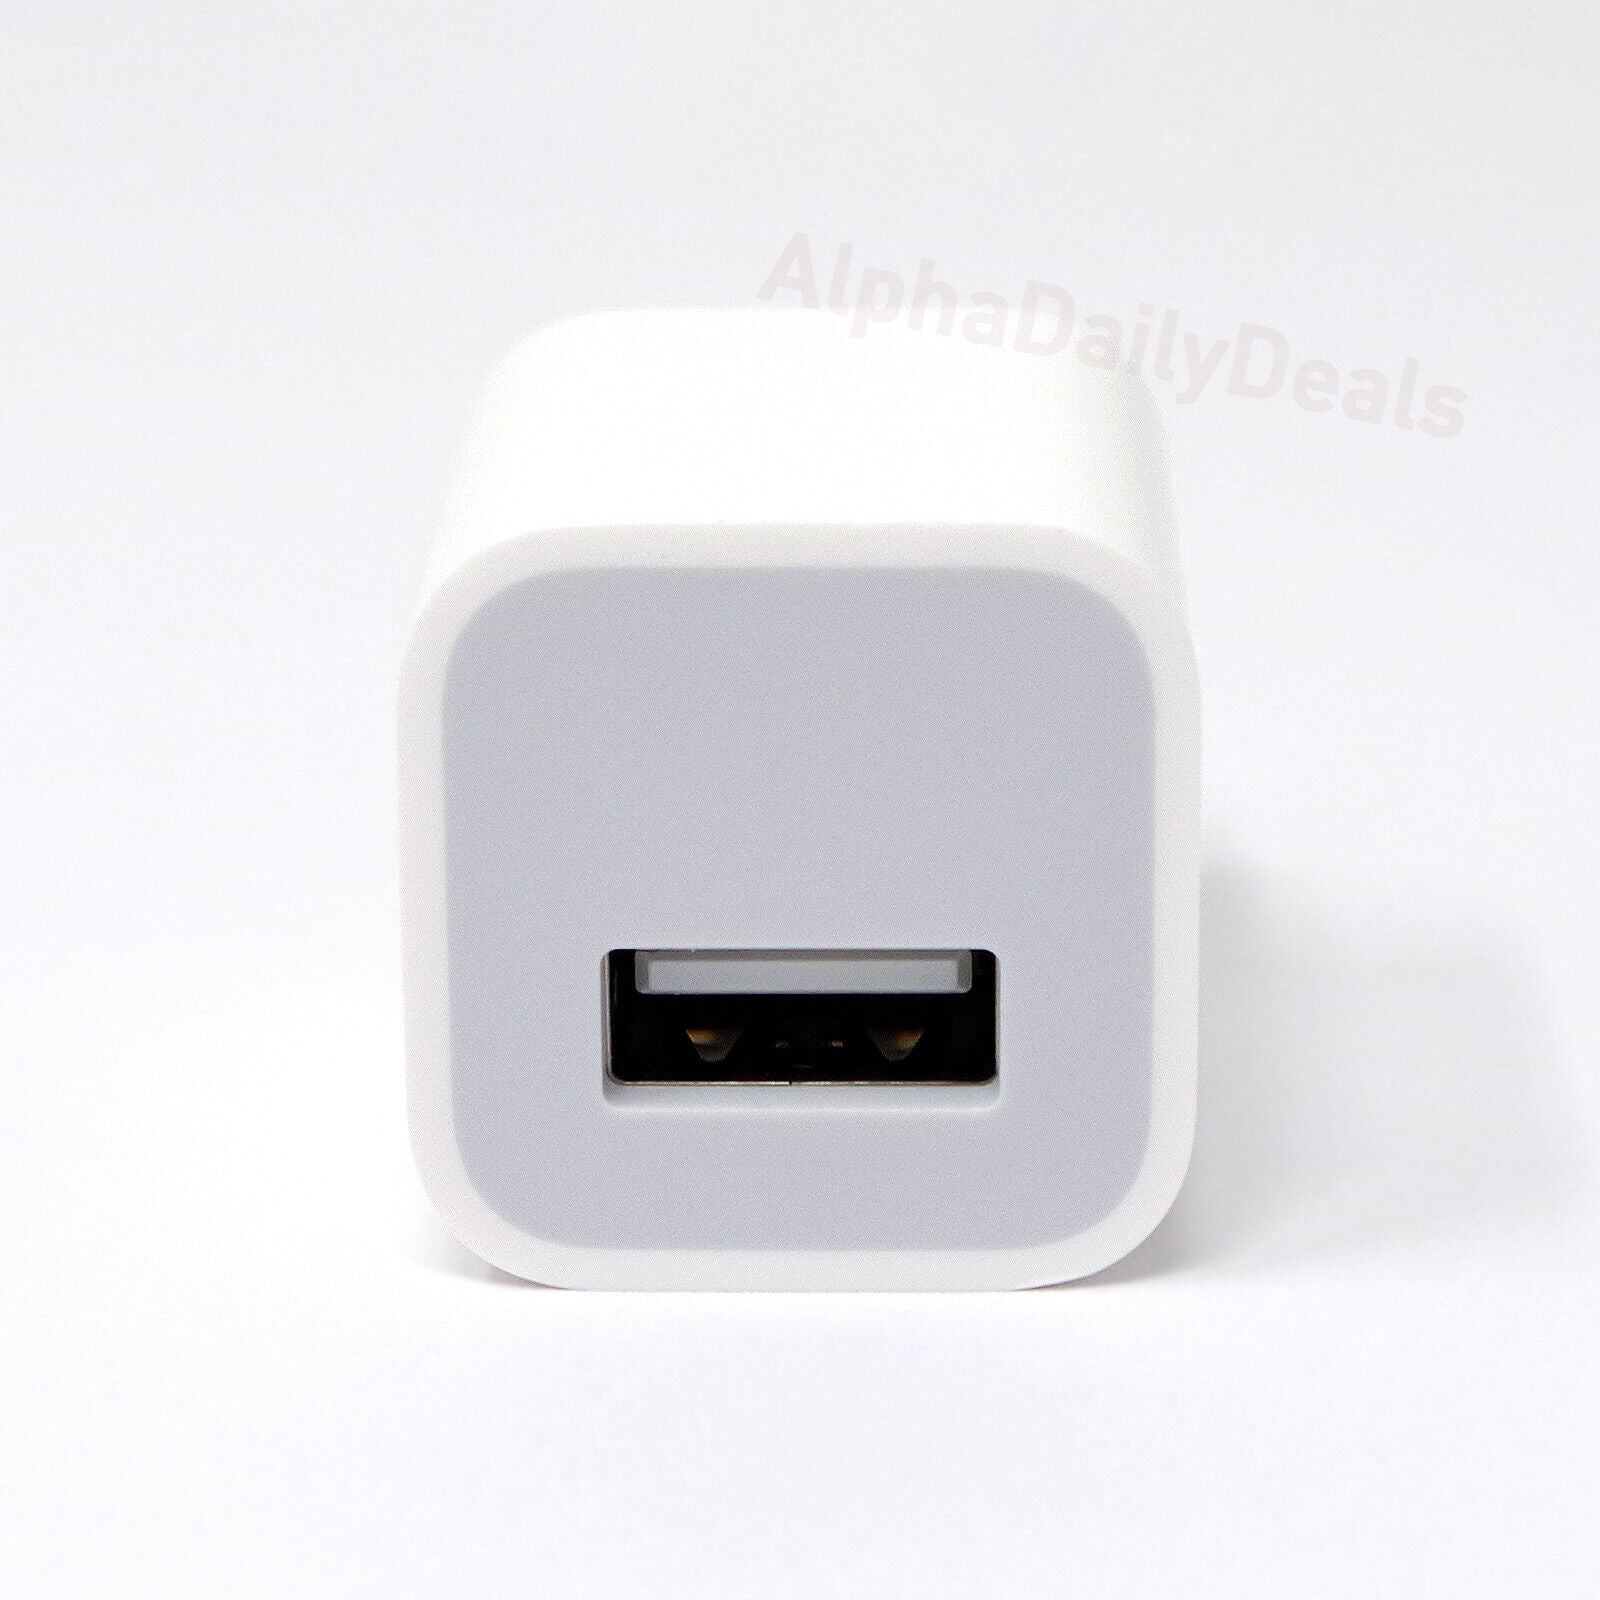 Genuine OEM Apple A1385 5W USB Travel Power Adapter Cube Charger iPhone iPad